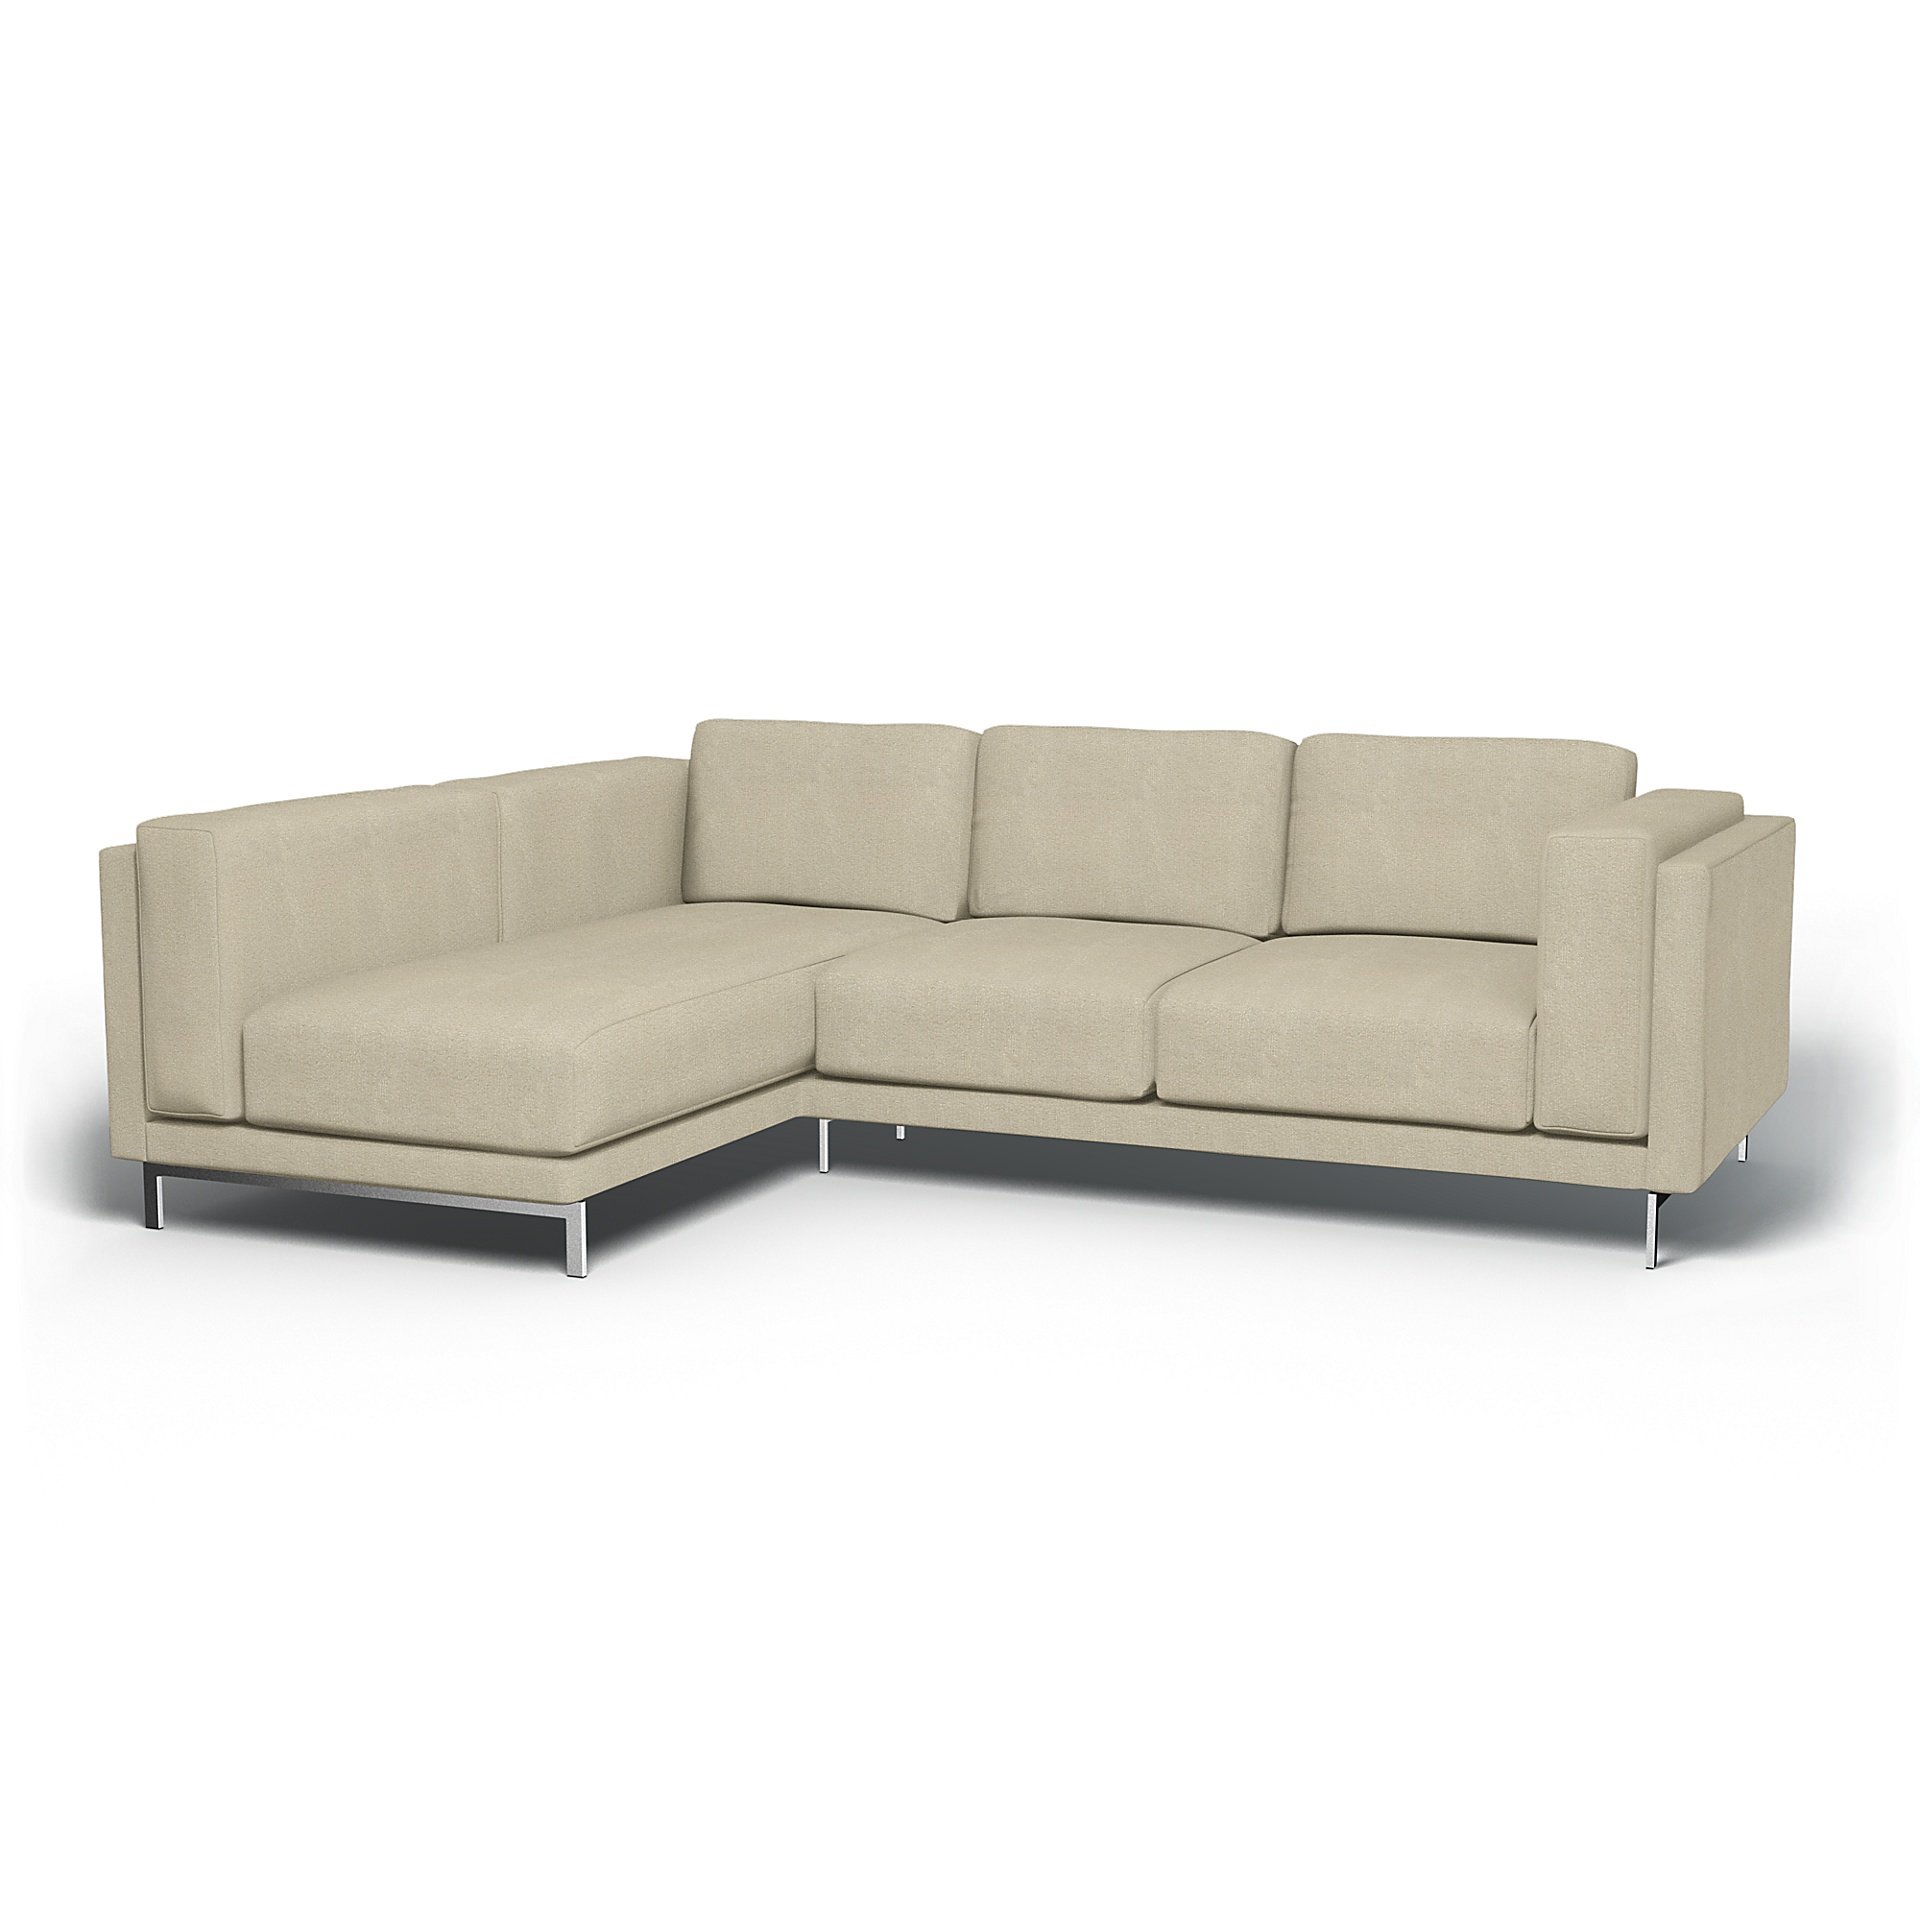 IKEA - Nockeby 3 Seater Sofa with Left Chaise Cover, Cream, Boucle & Texture - Bemz